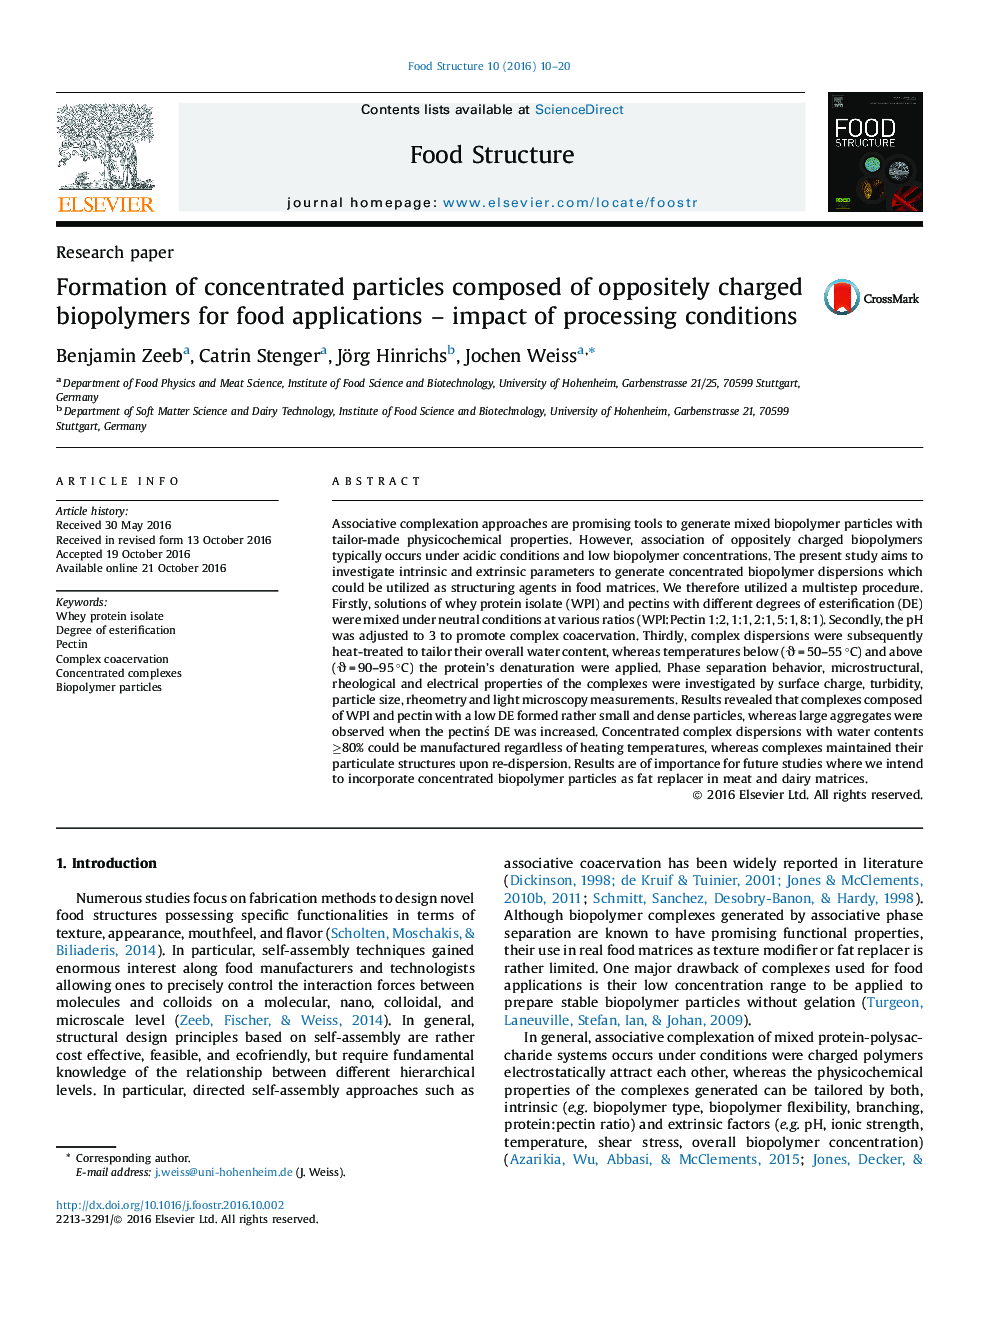 Formation of concentrated particles composed of oppositely charged biopolymers for food applications - impact of processing conditions